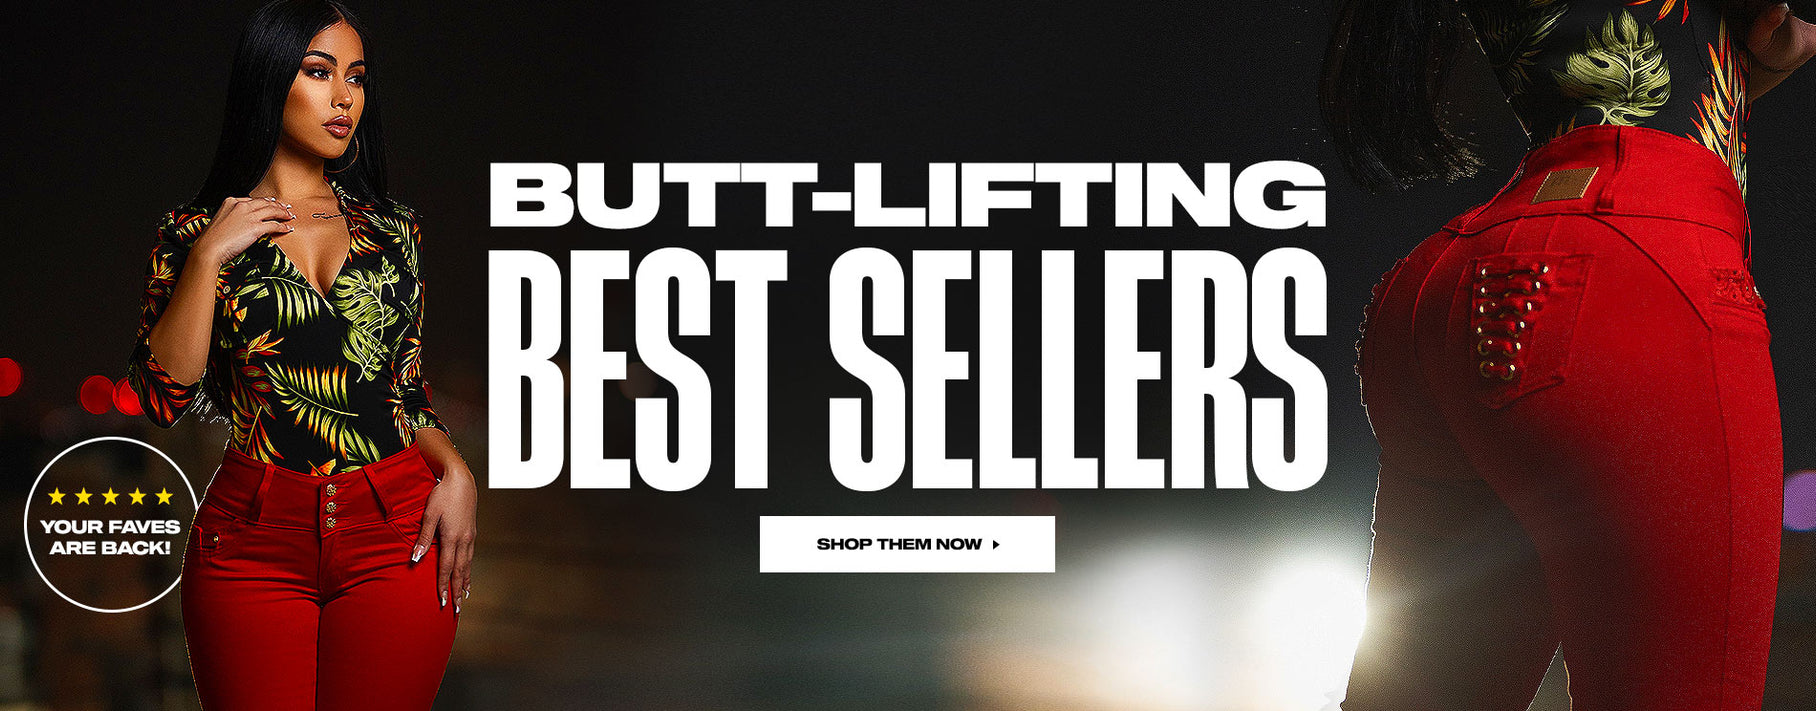 Butt-Lifting Best Sellers: Your Faves are Back! Shop Them Now